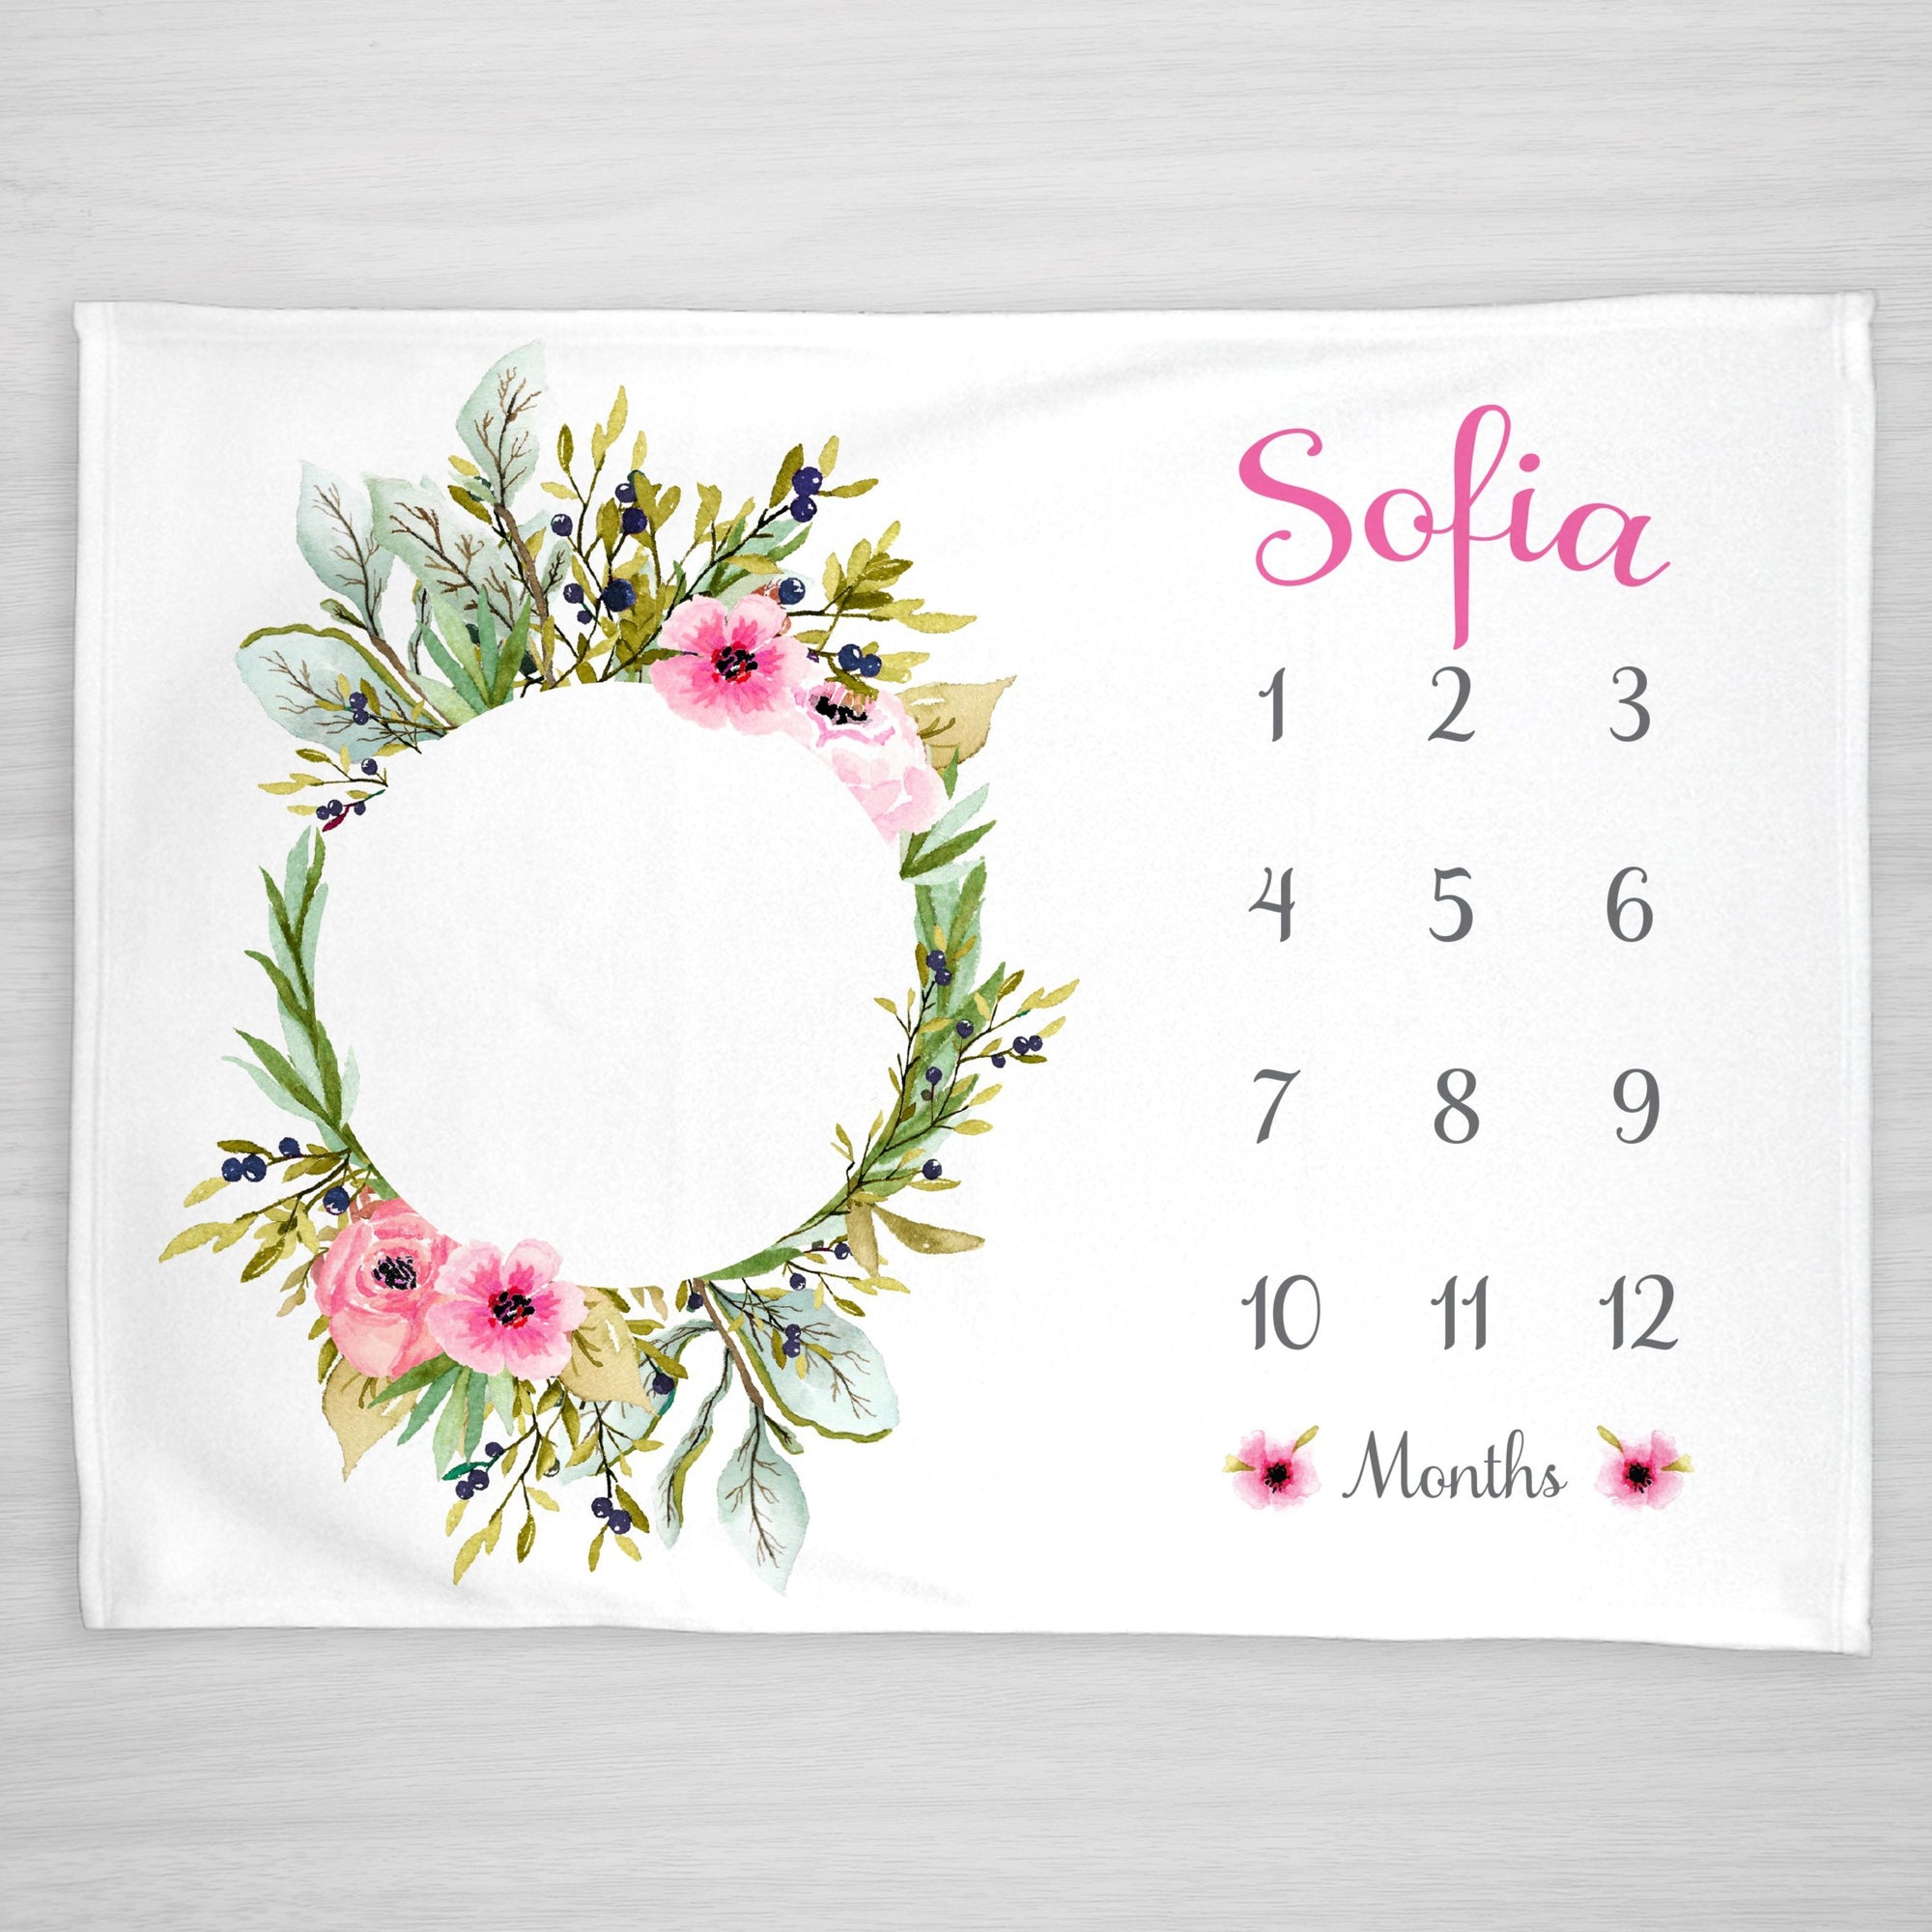 Olive Wreath Floral Milestone Baby Blanket, Pink flowers with gray text